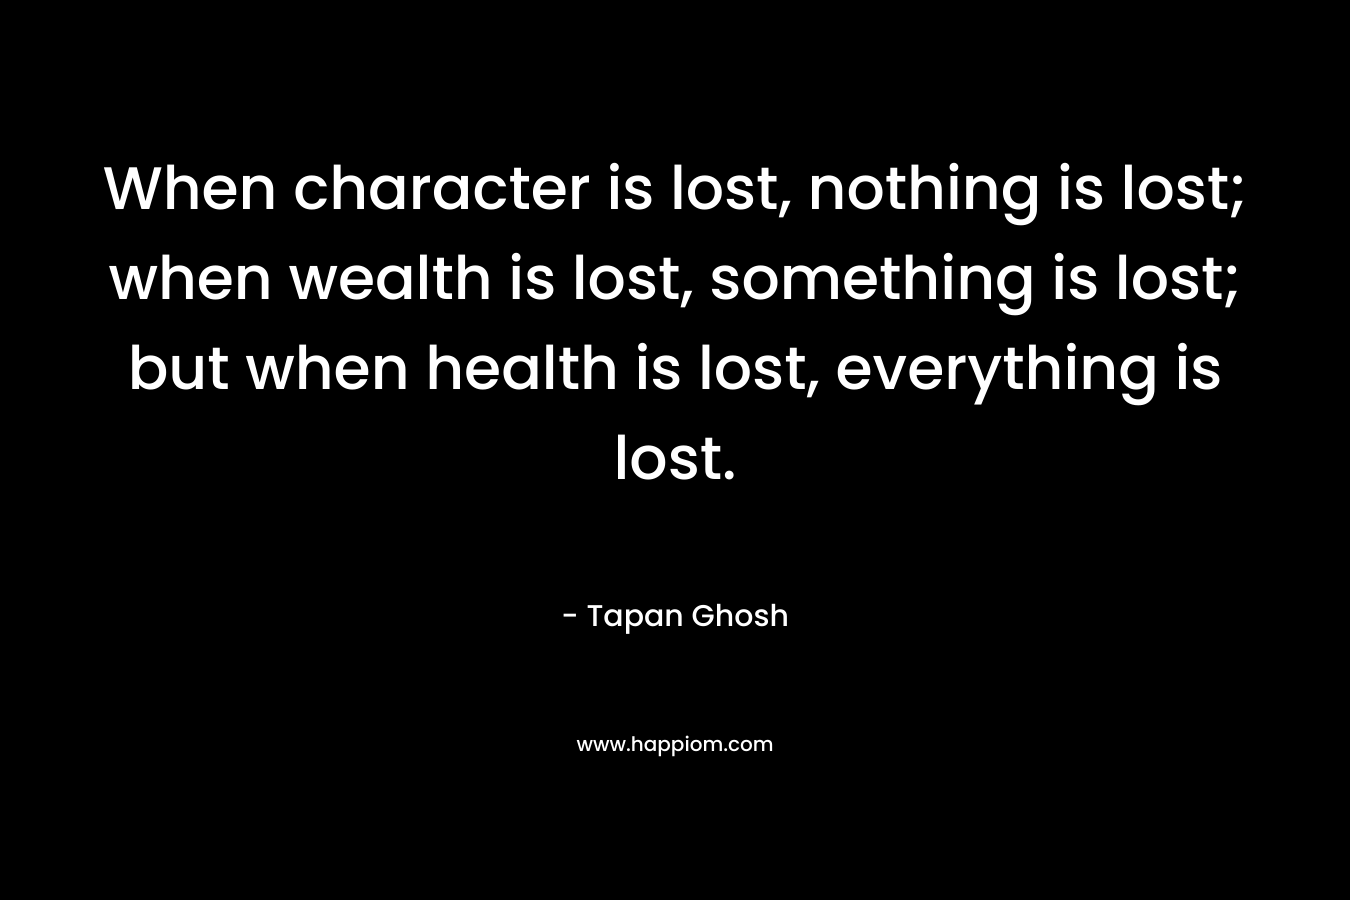 When character is lost, nothing is lost; when wealth is lost, something is lost; but when health is lost, everything is lost.